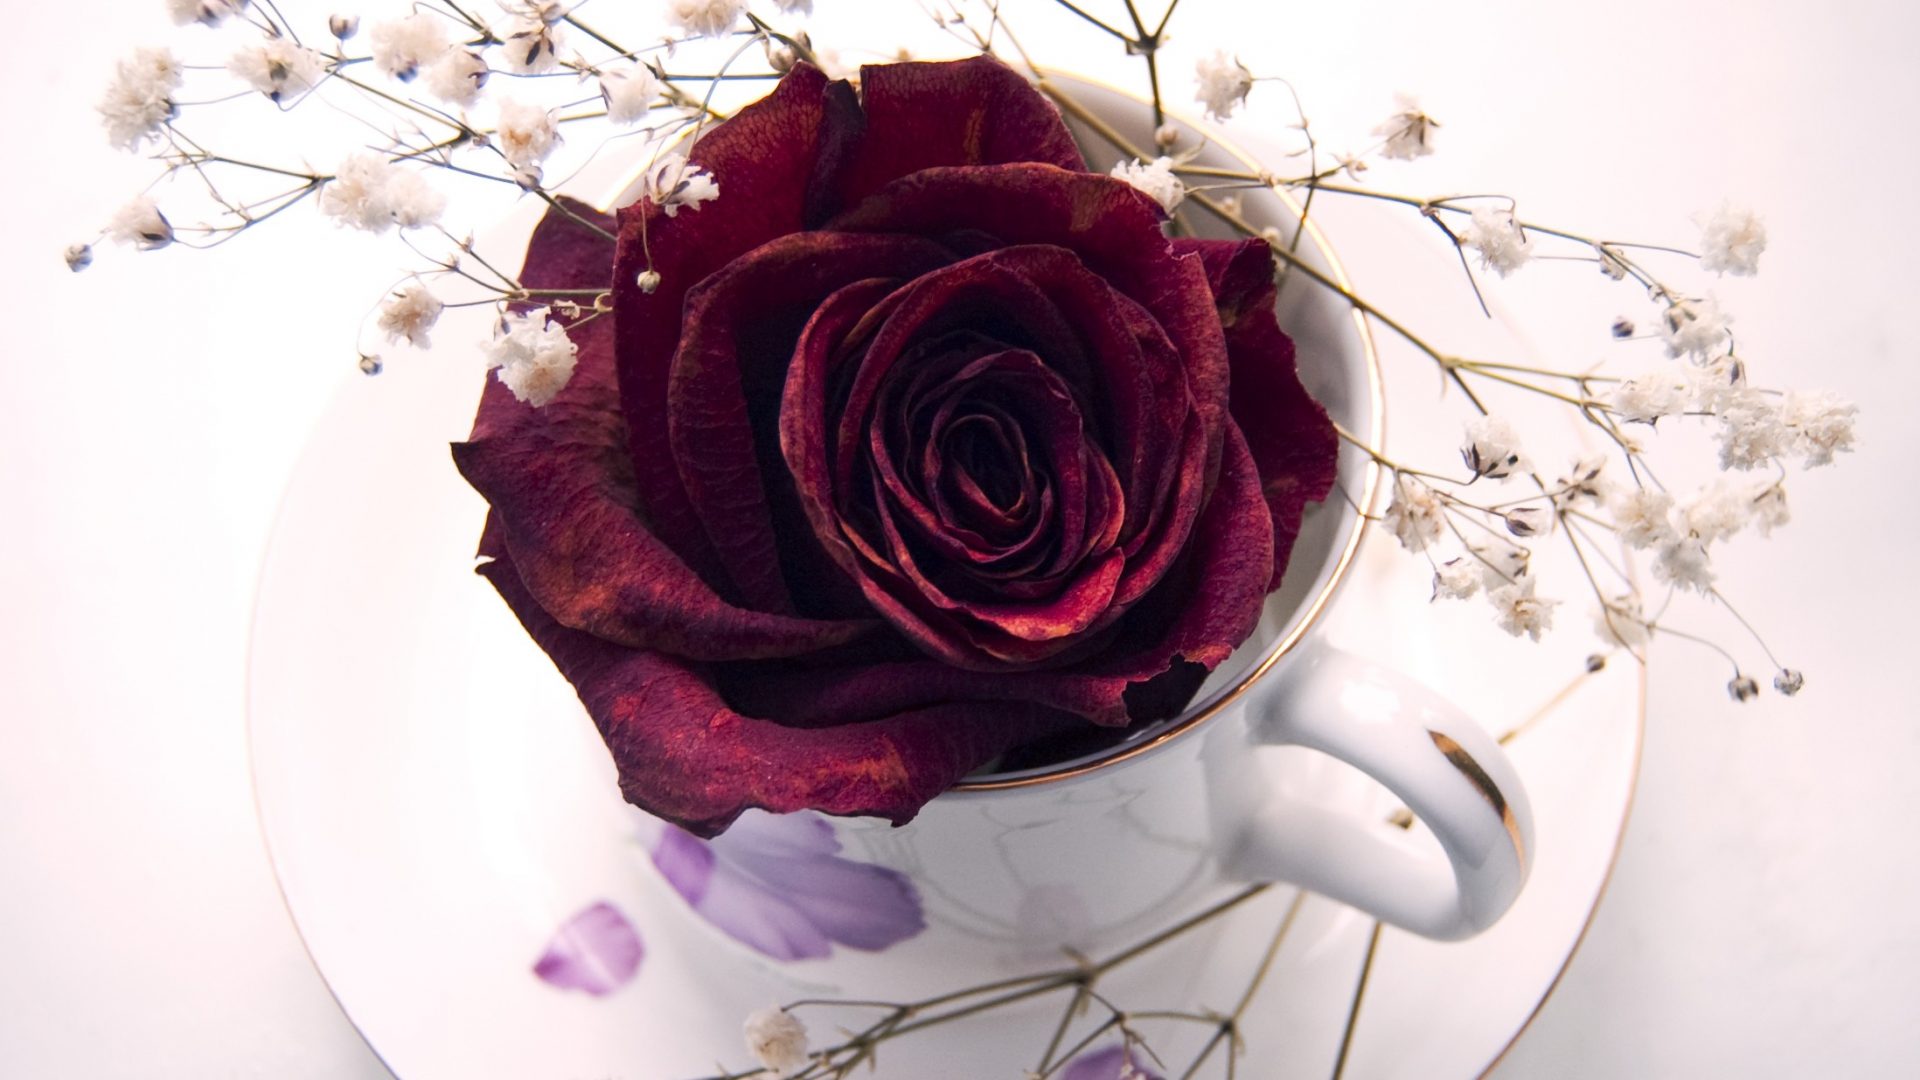 Flower: Dry Rose Cup Red Heart Flower Hd New Image HD 16:9 High ...